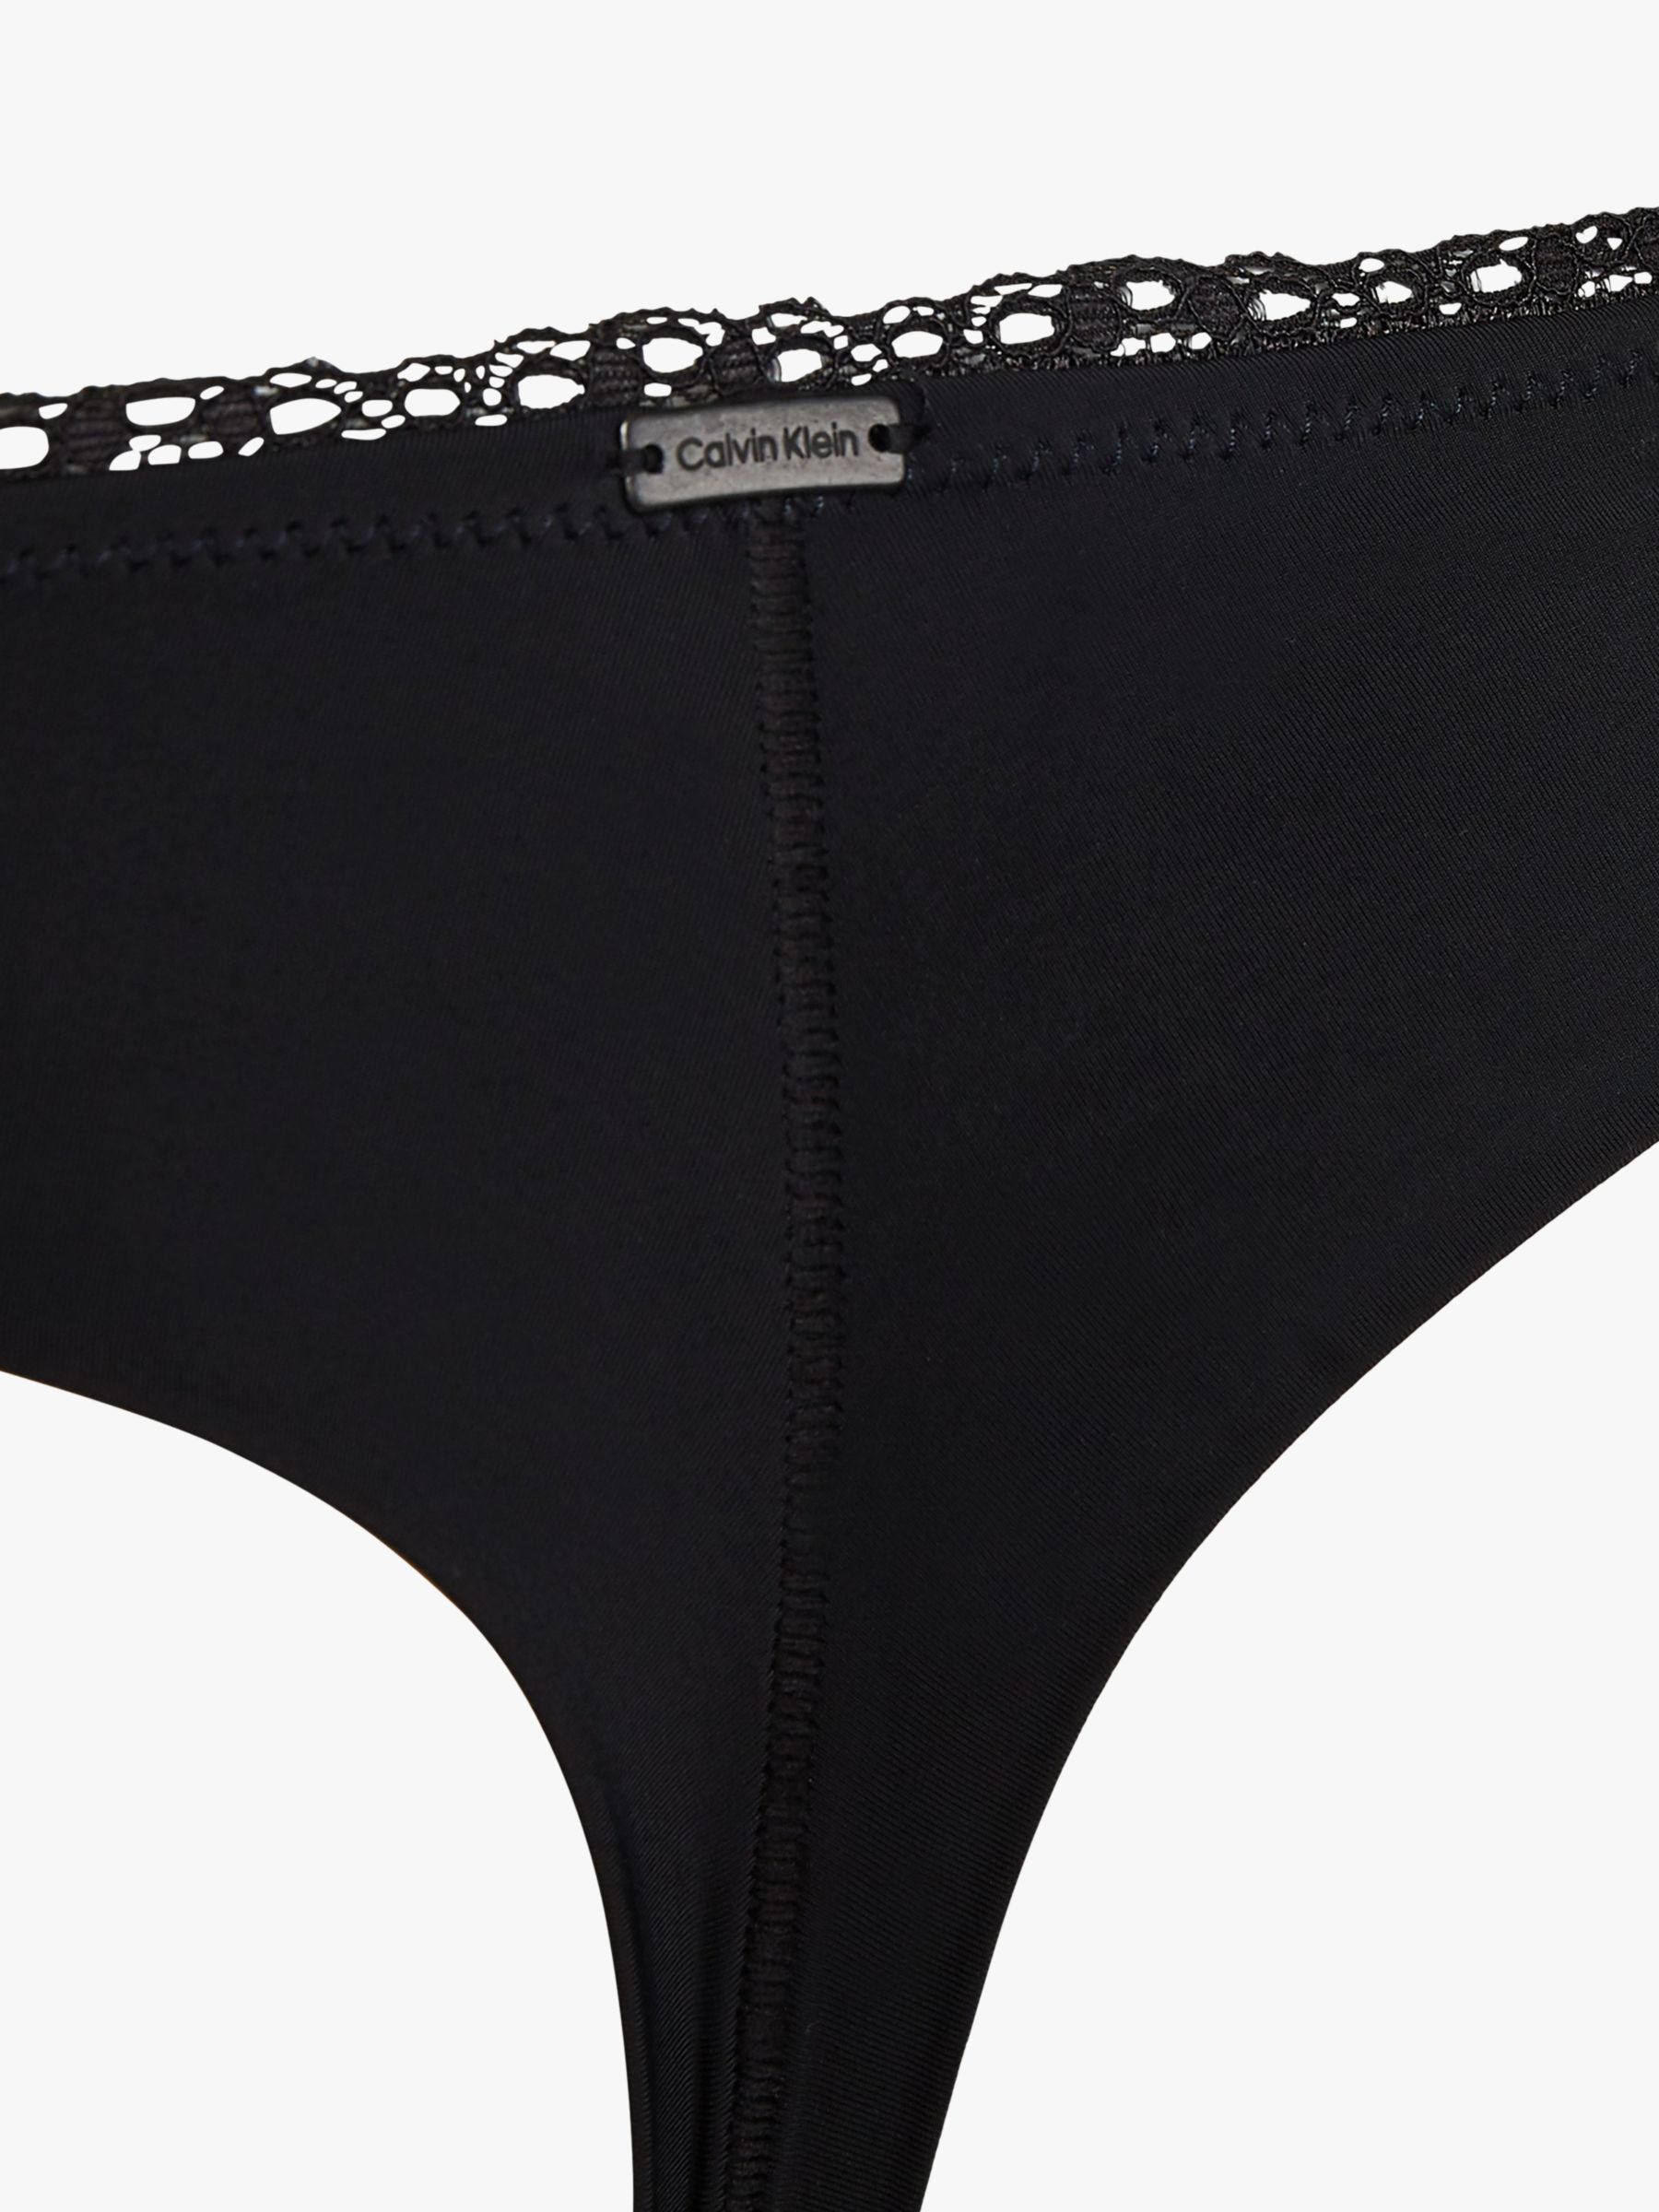 Calvin Klein Jeans MODERN THONG Black - Fast delivery